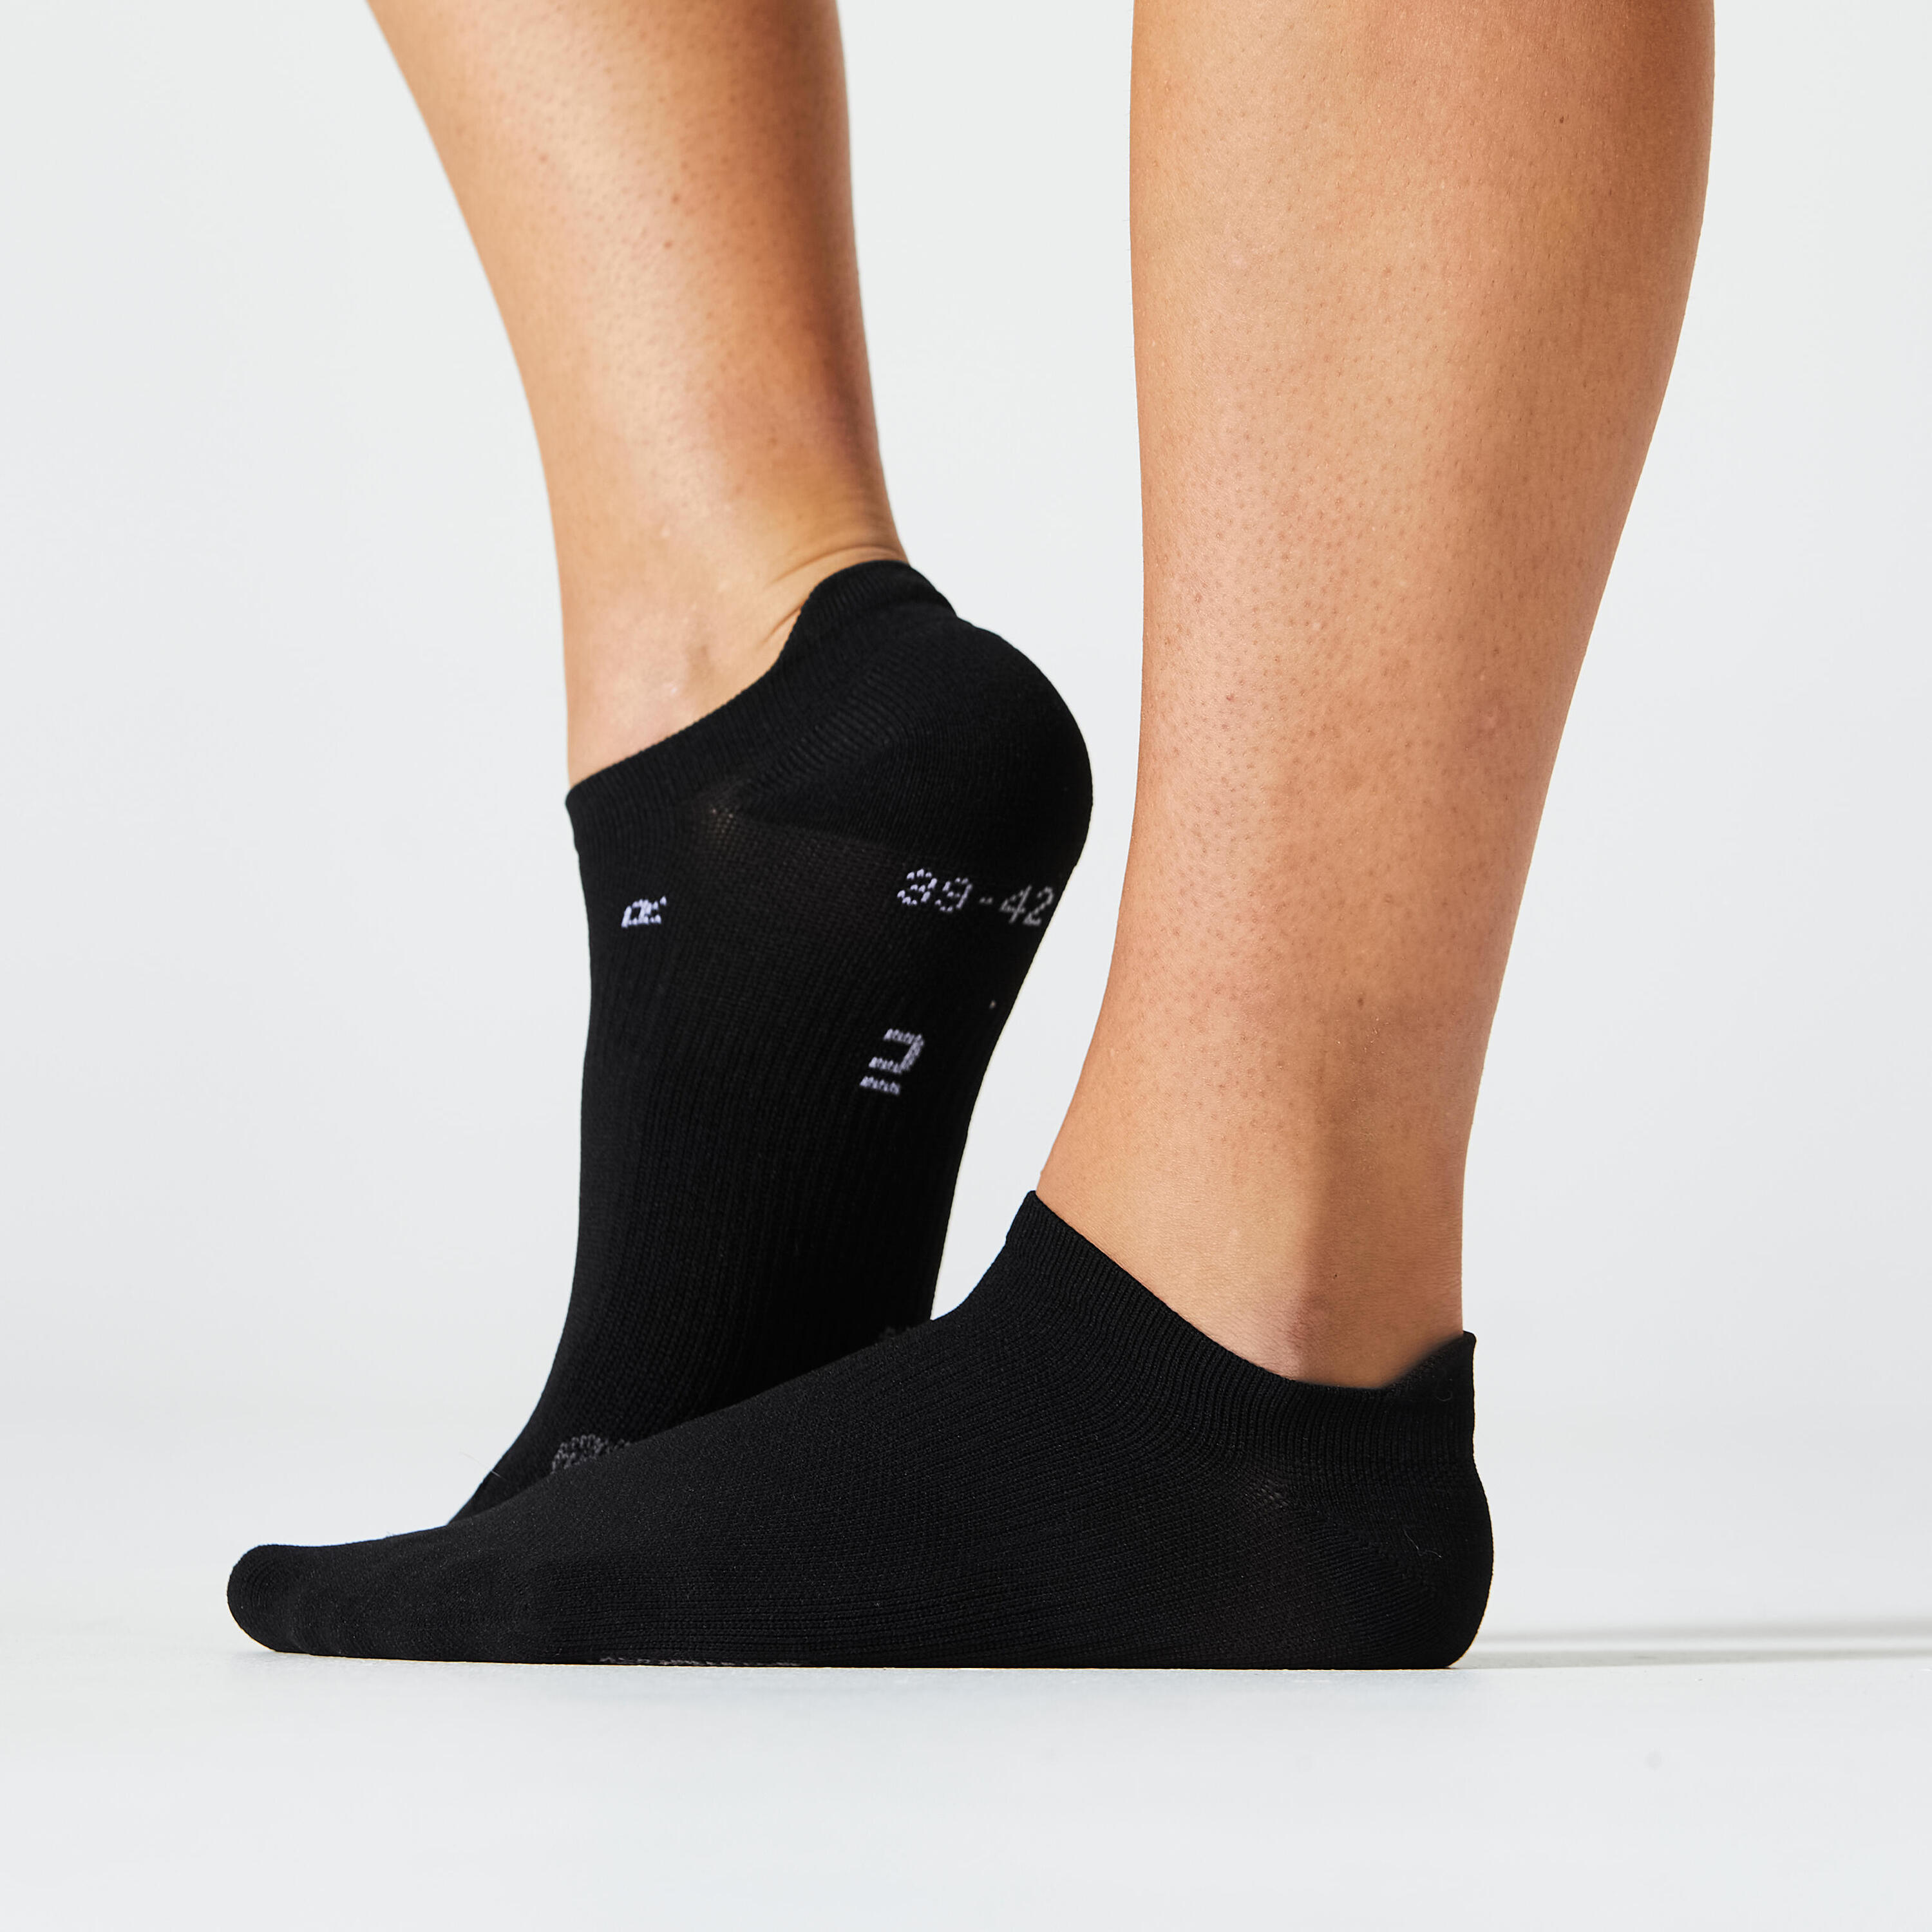 Women's Invisible Socks Twin-Pack - Black 4/4